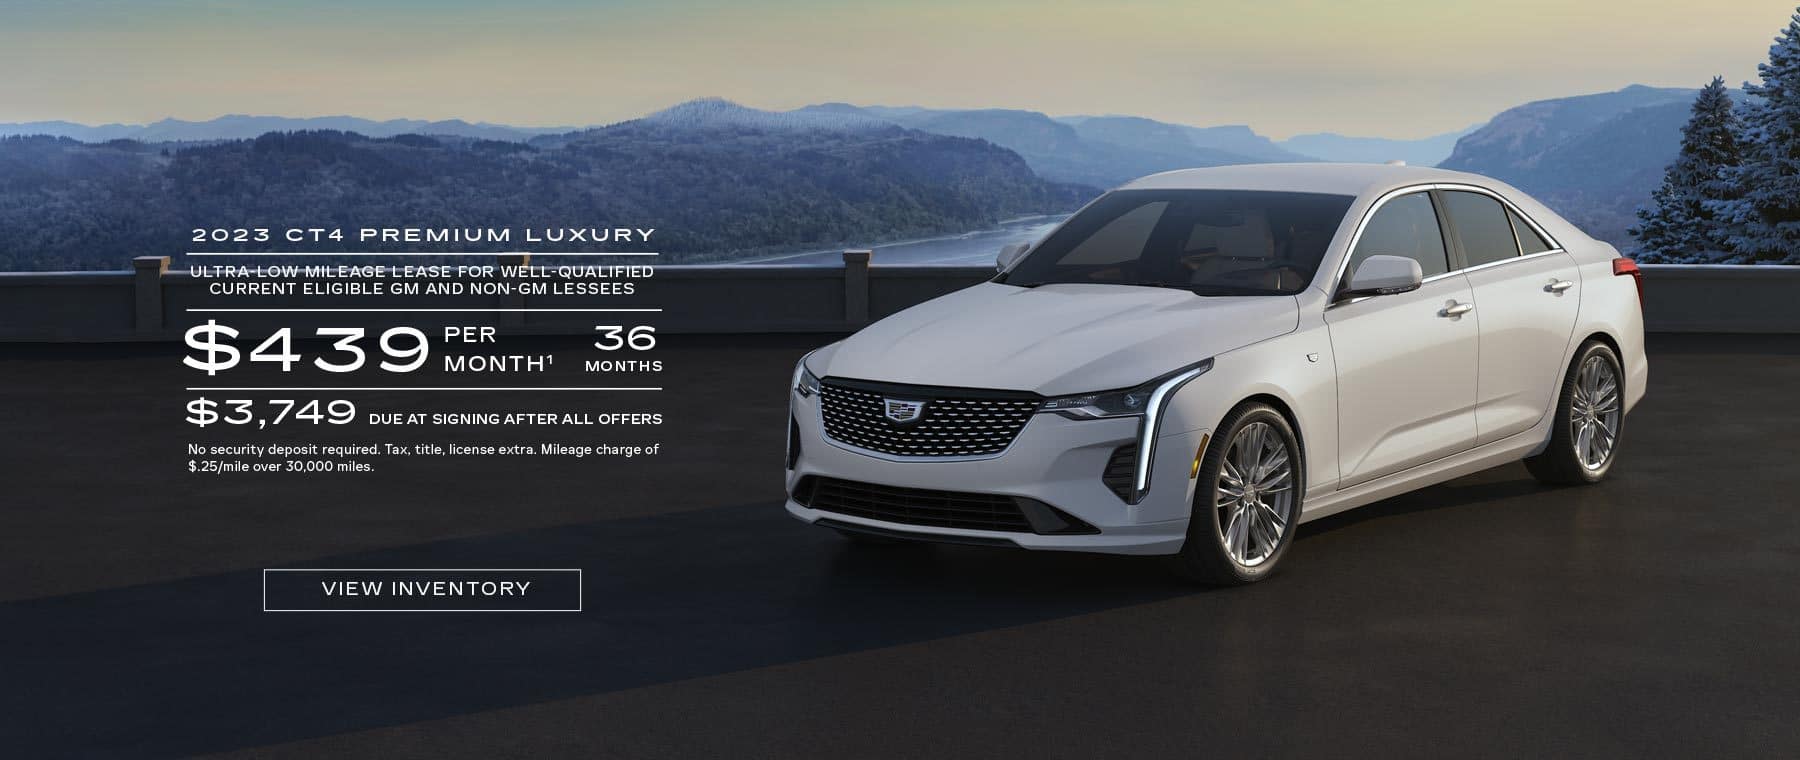 2023 CT4 Premium Luxury. Ultra-low mileage lease for well-qualified current eligible GM and NON-GM lessees. $439 per month. 36 months. $3,749 due at signing after all offers.